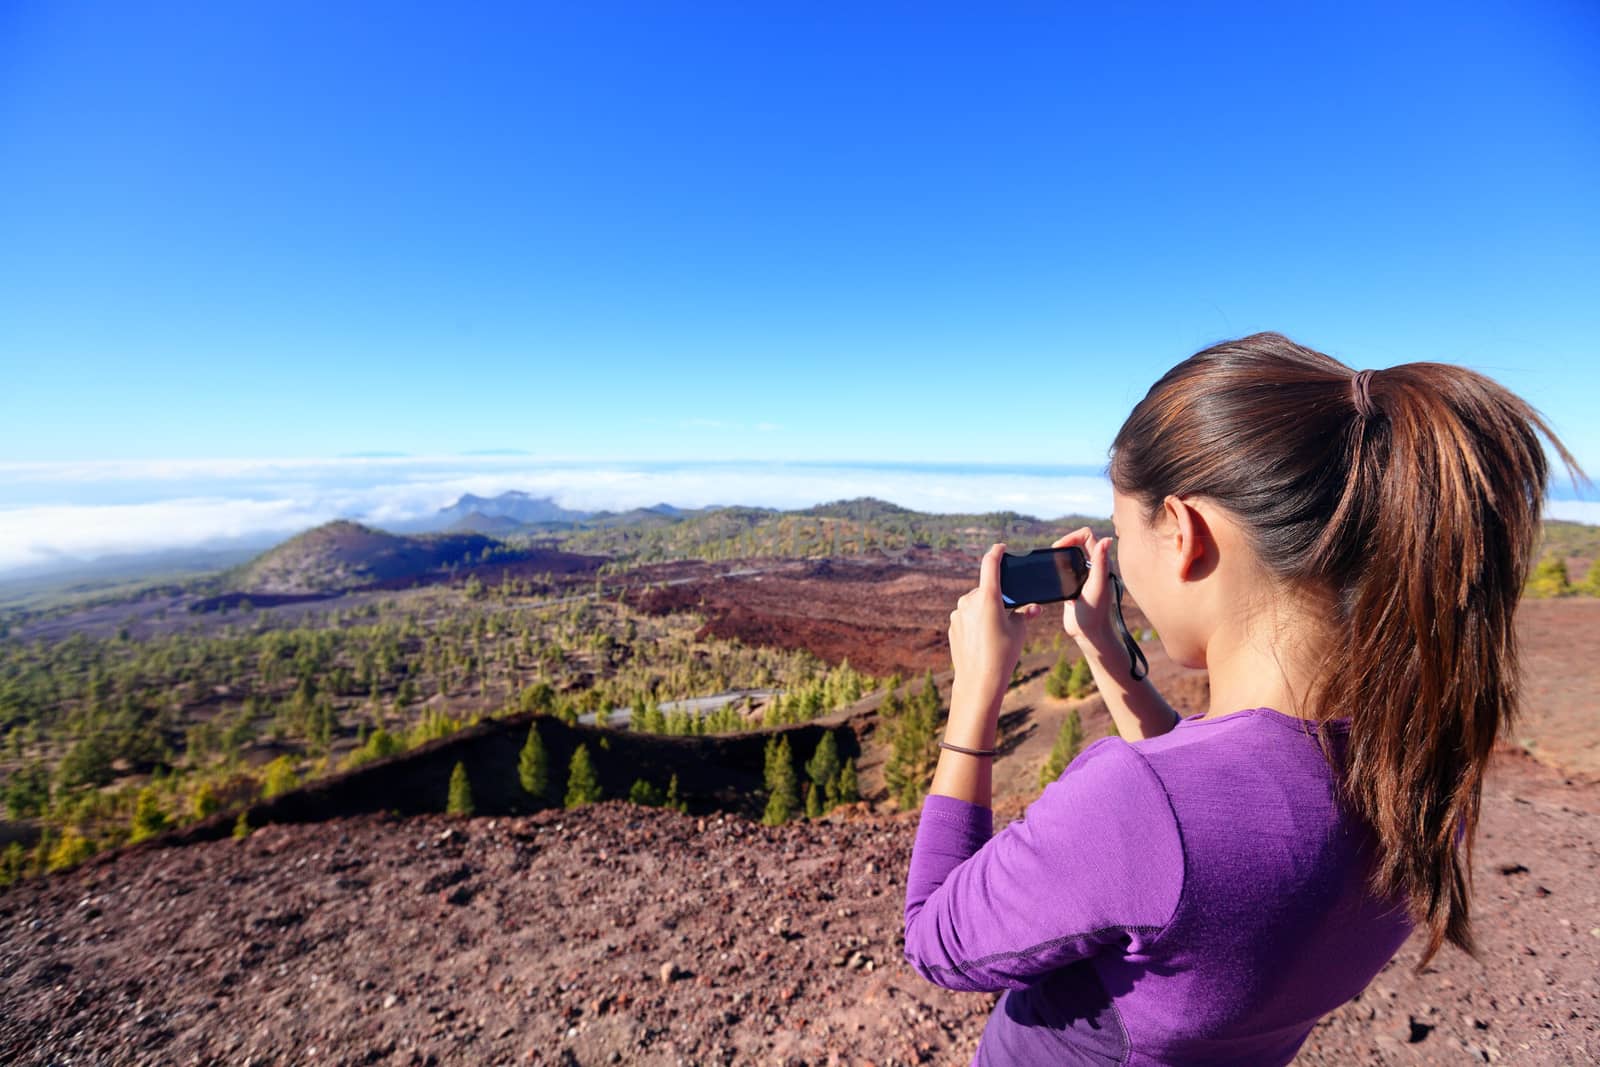 Hiker taking landscape picture on top of mountain. Beautiful nature on the volcano Teide, Tenerife, Canary islands with girl tourist using smartphone to take photos.